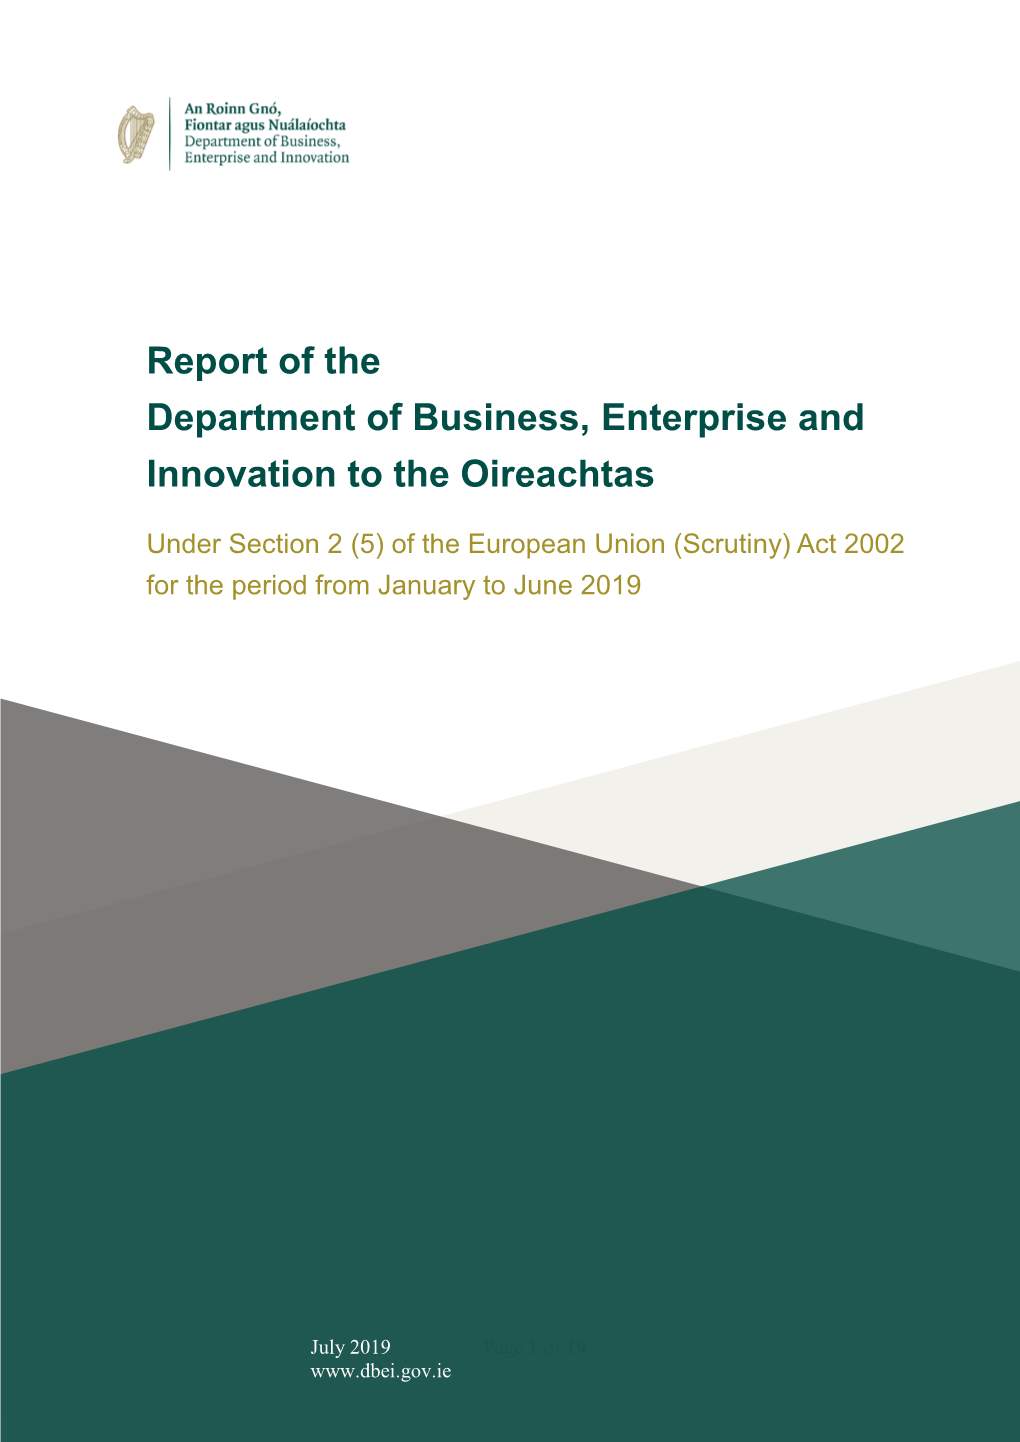 Report of the Department of Business, Enterprise and Innovation to the Oireachtas